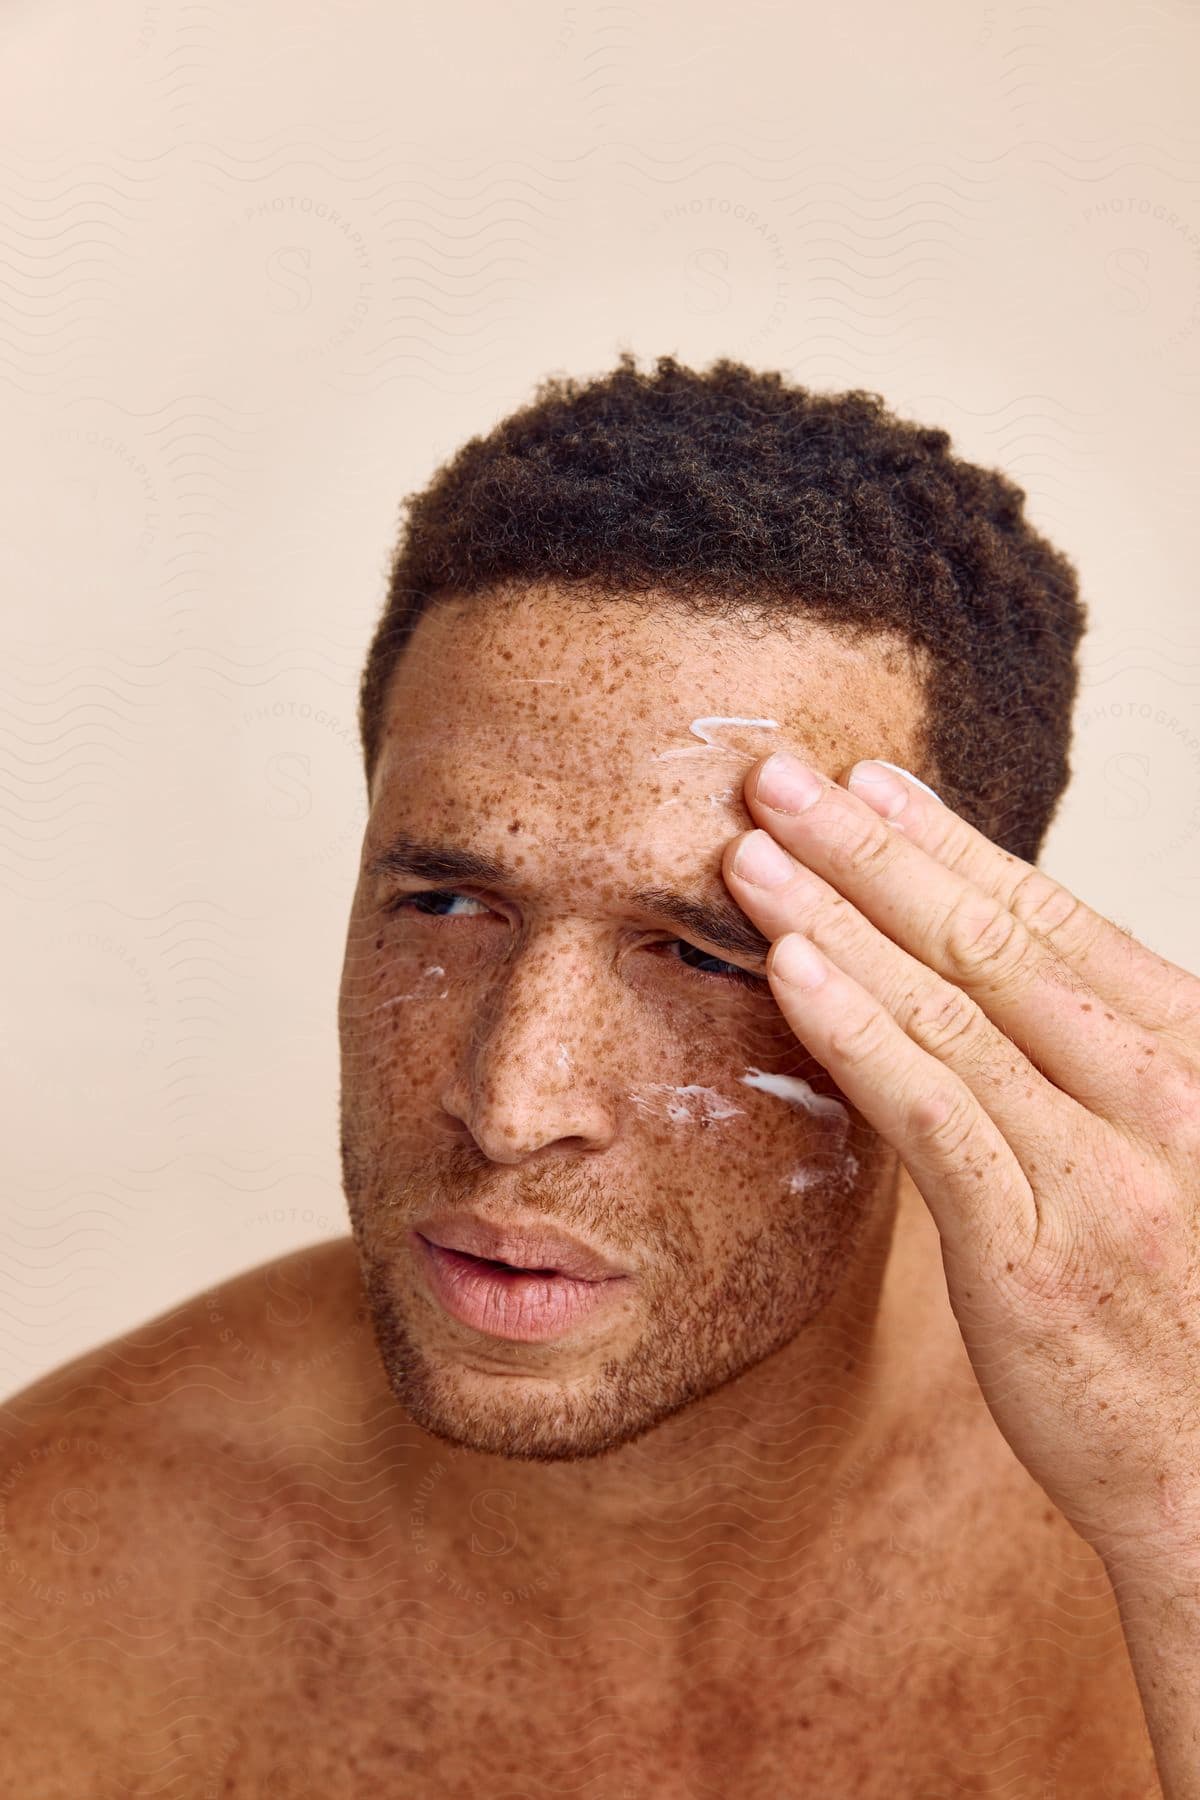 A shirtless freckled man applying face cream.